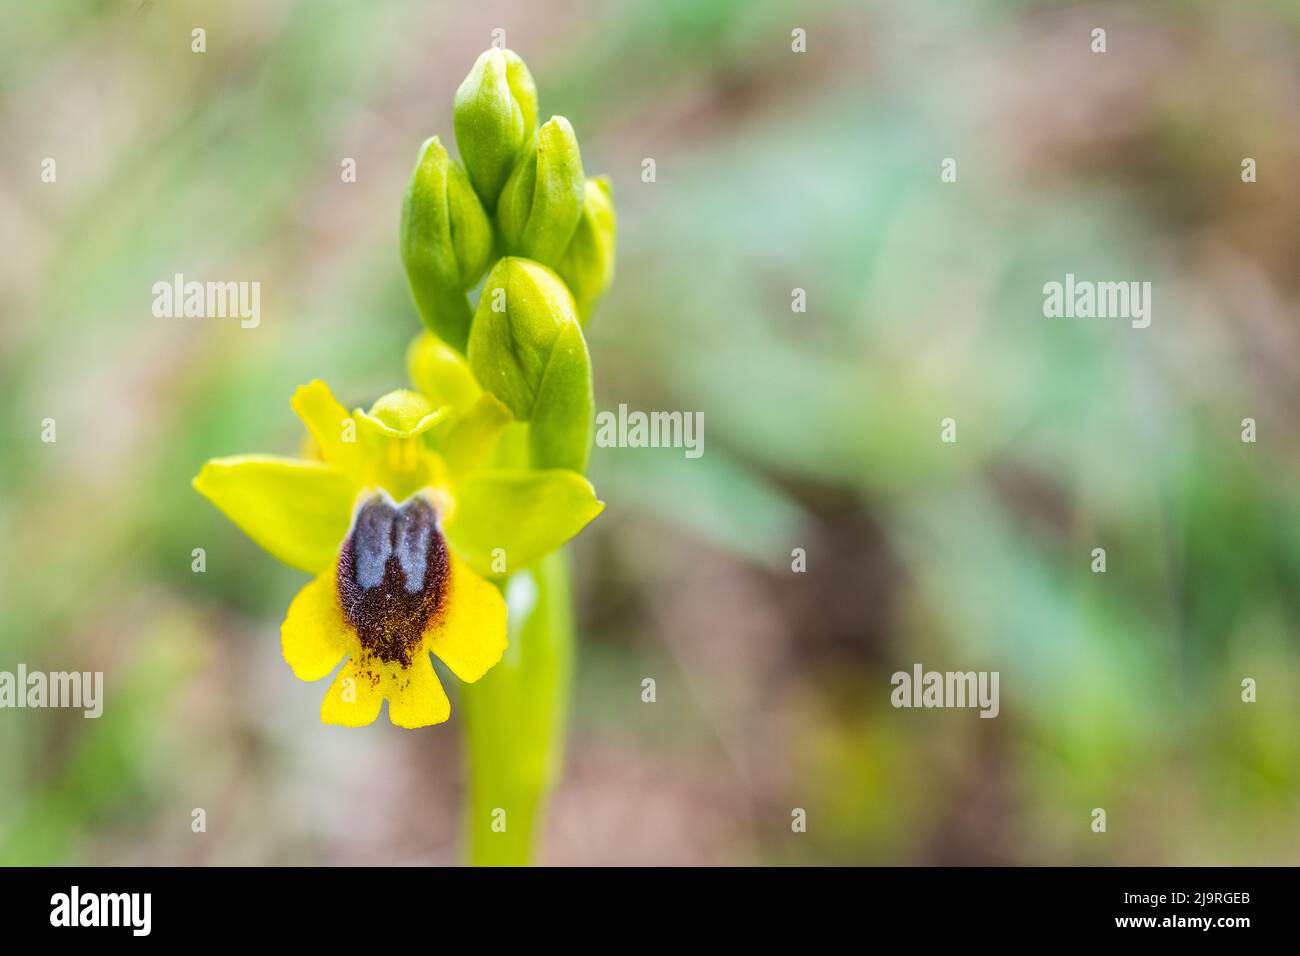 Ophrys lutea, the yellow bee-orchid, is a species of orchid native to southern Europe, North Africa, and the Middle East. Stock Photo